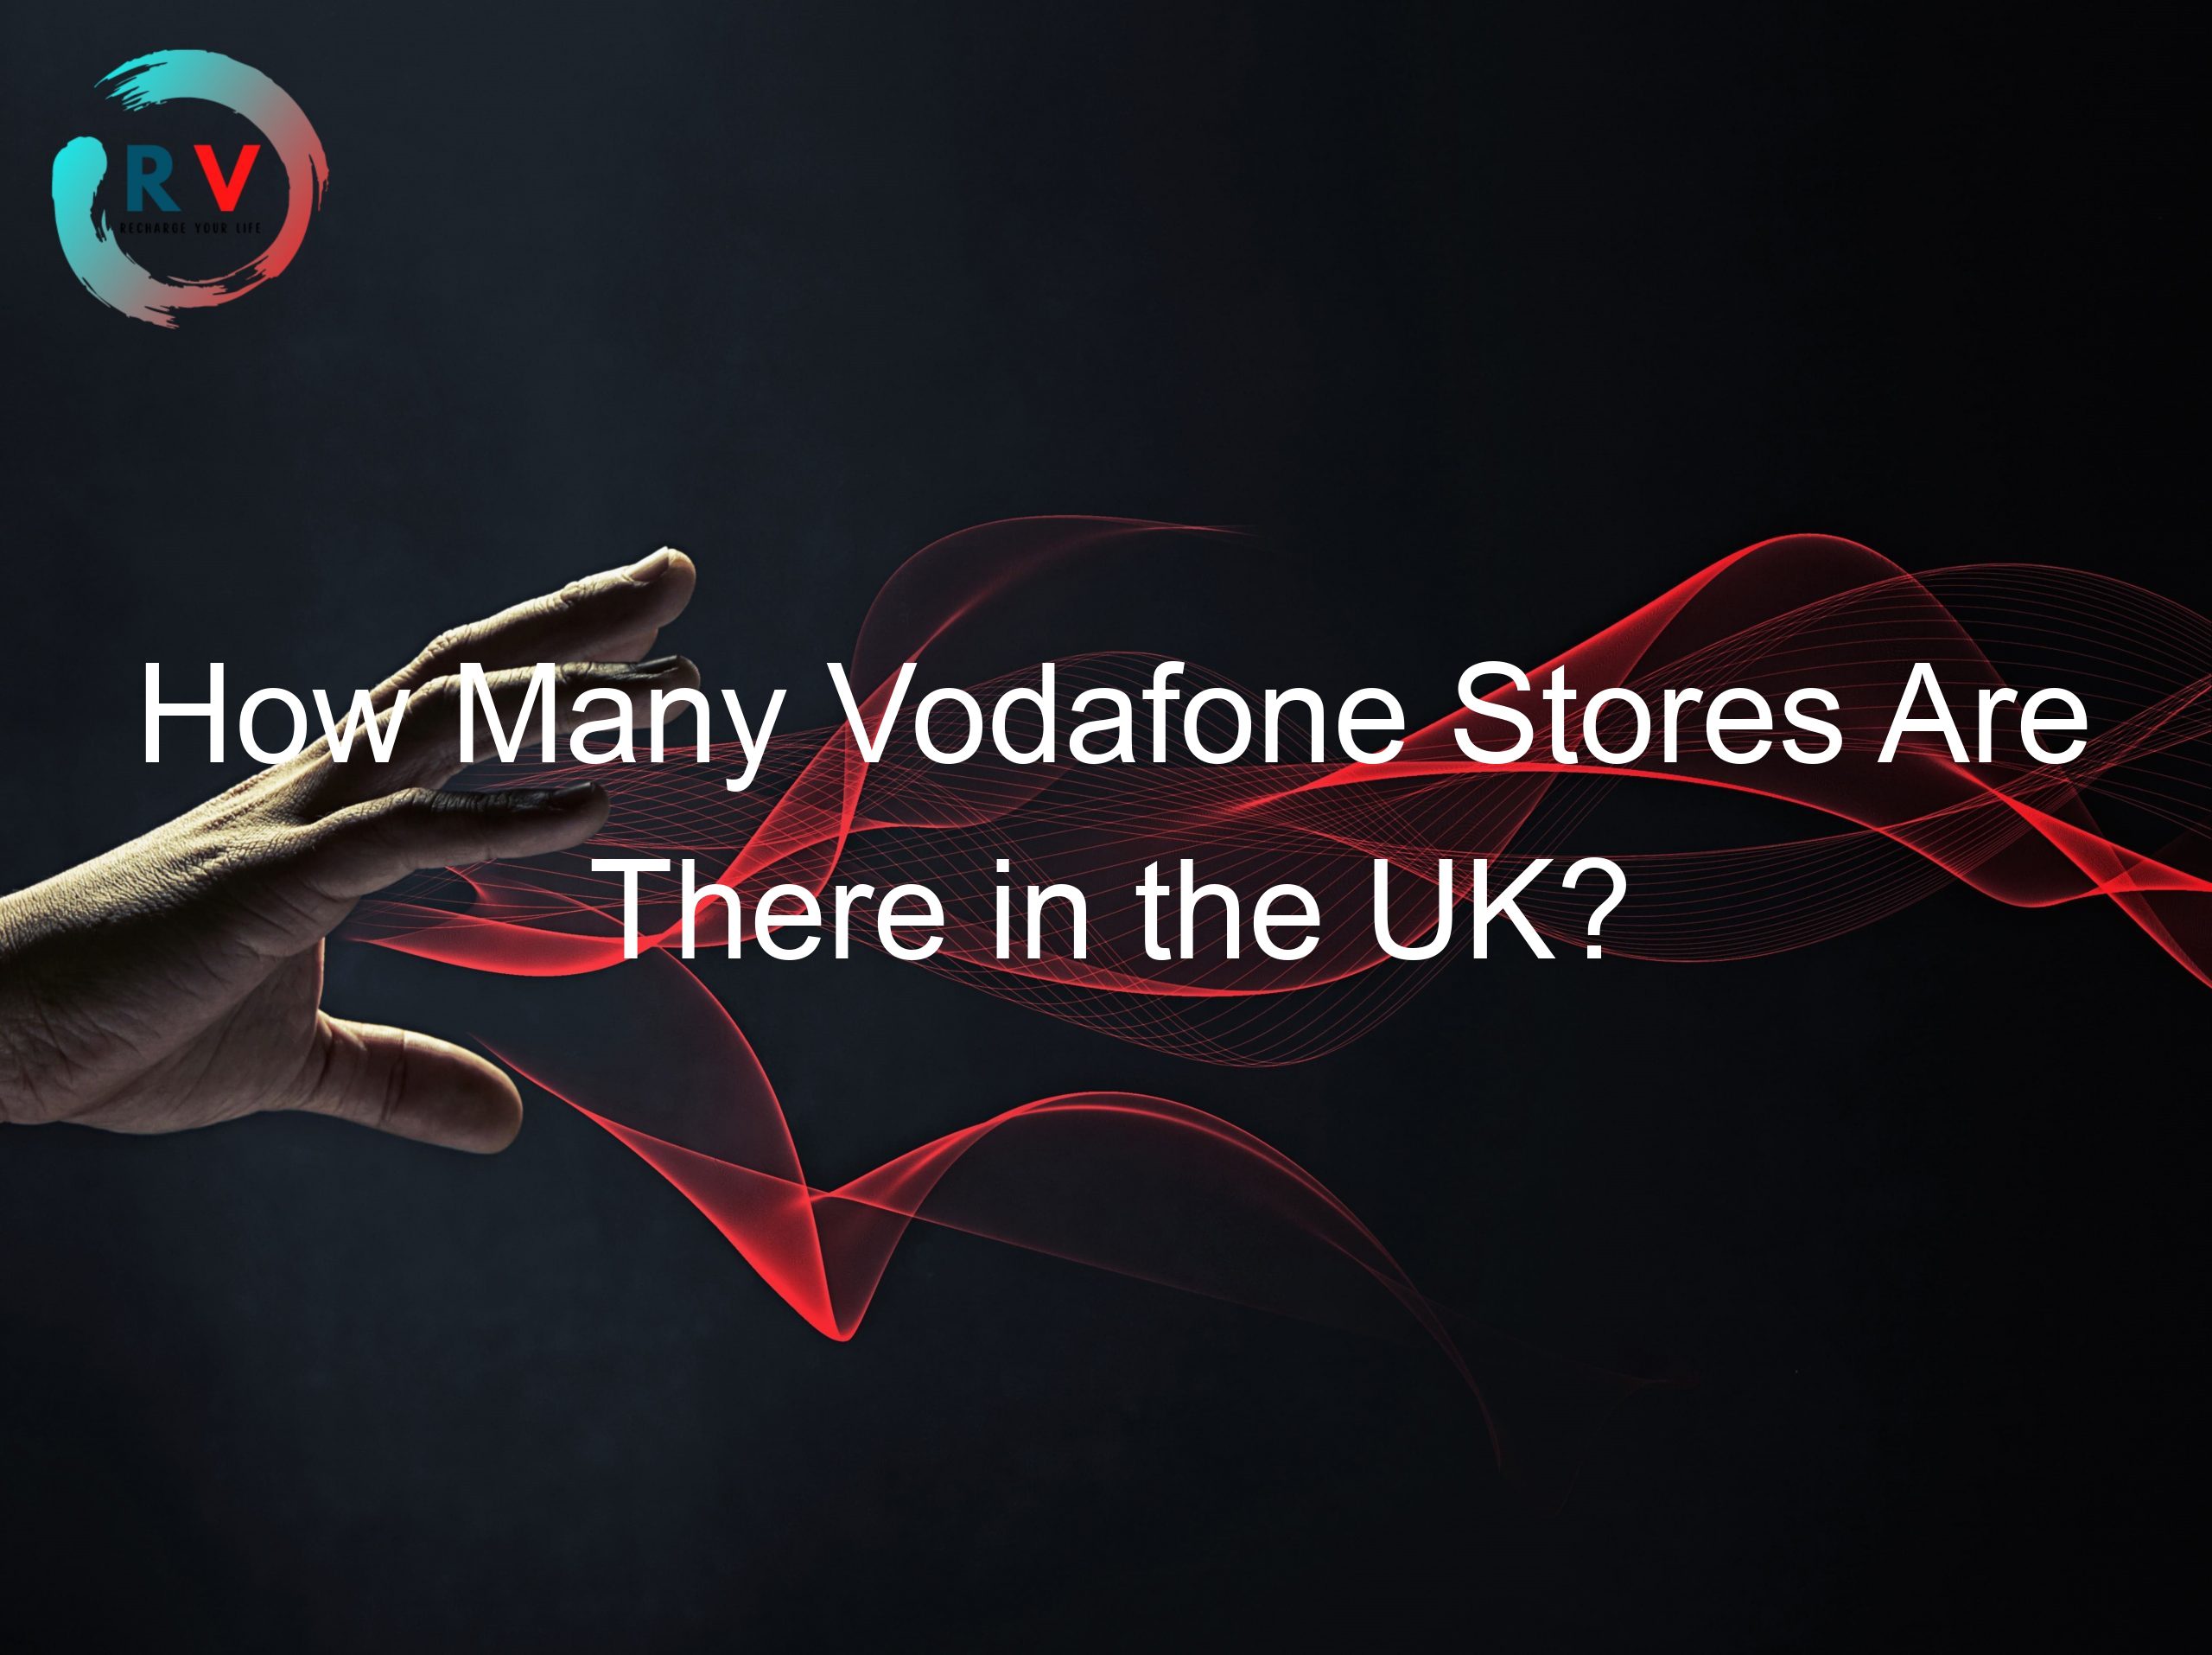 How Many Vodafone Stores Are There in the UK?